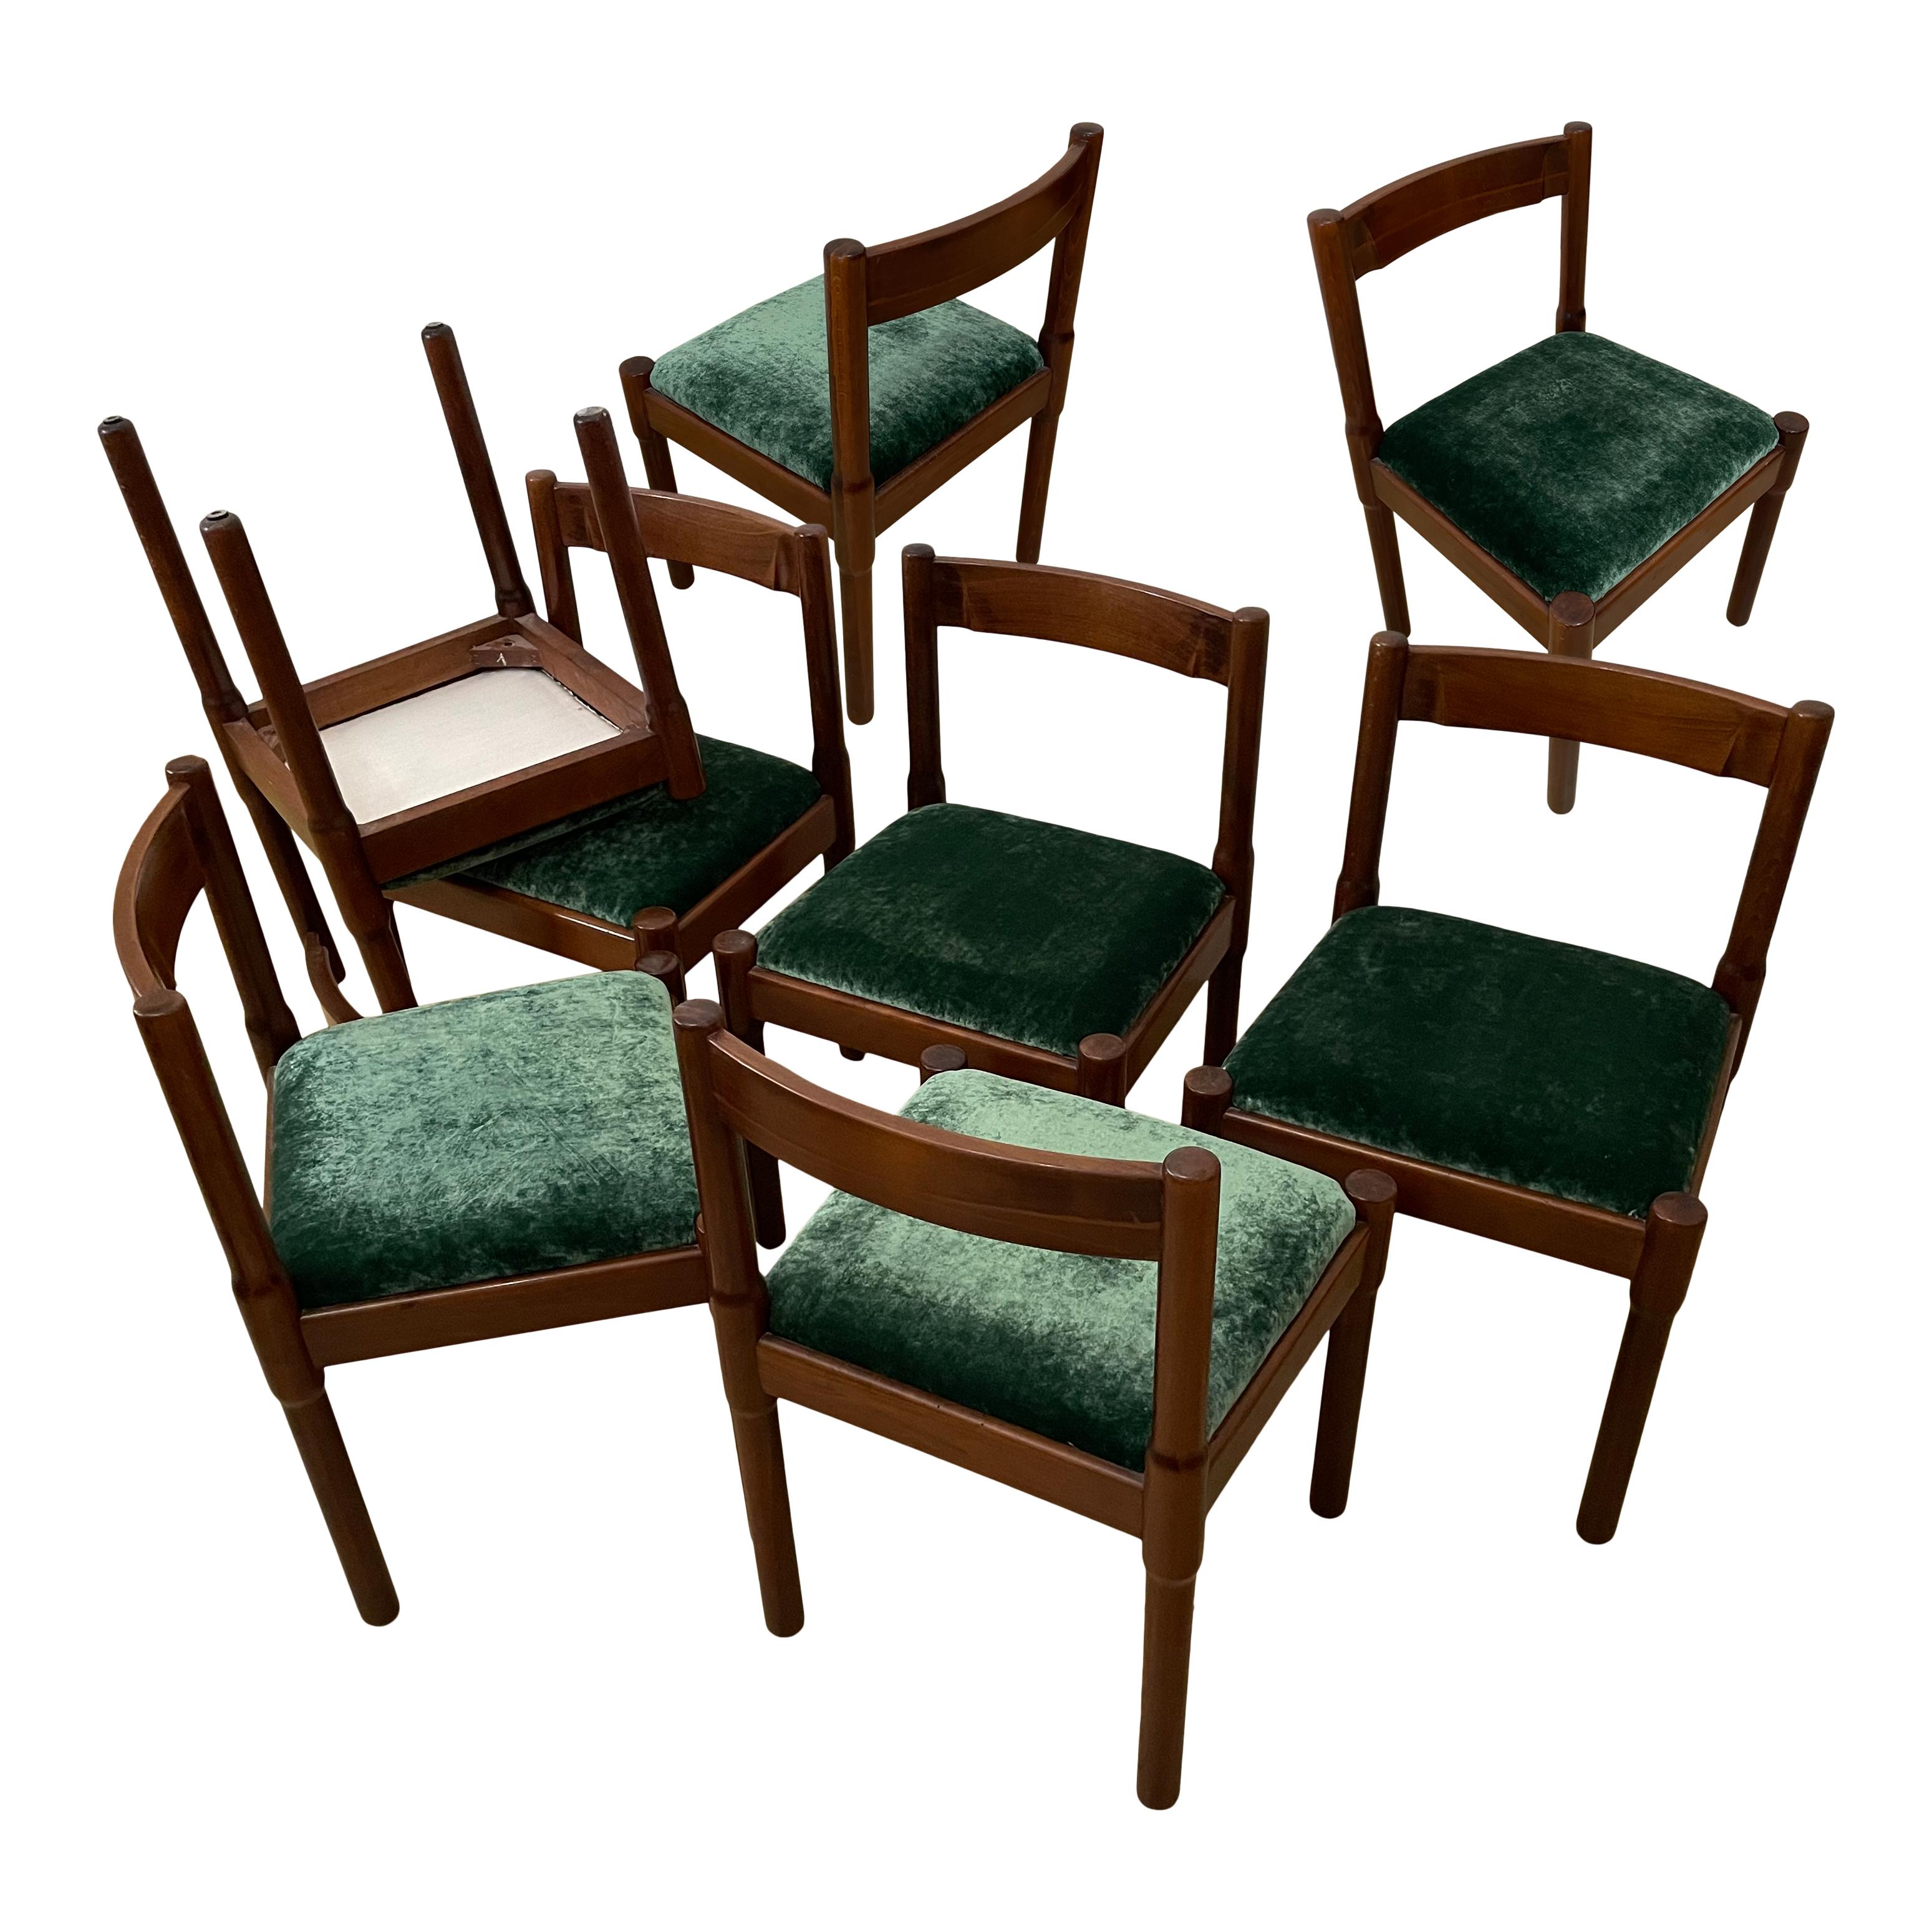  Set of 10 “Carimate” chairs designed by Vico Magistretti and produced by Cassina in 1963.

Initially commissioned for the Carimate Golf club near Milan, they were then produced for the public by Cassina.

Structure in brown beechwood, seating in